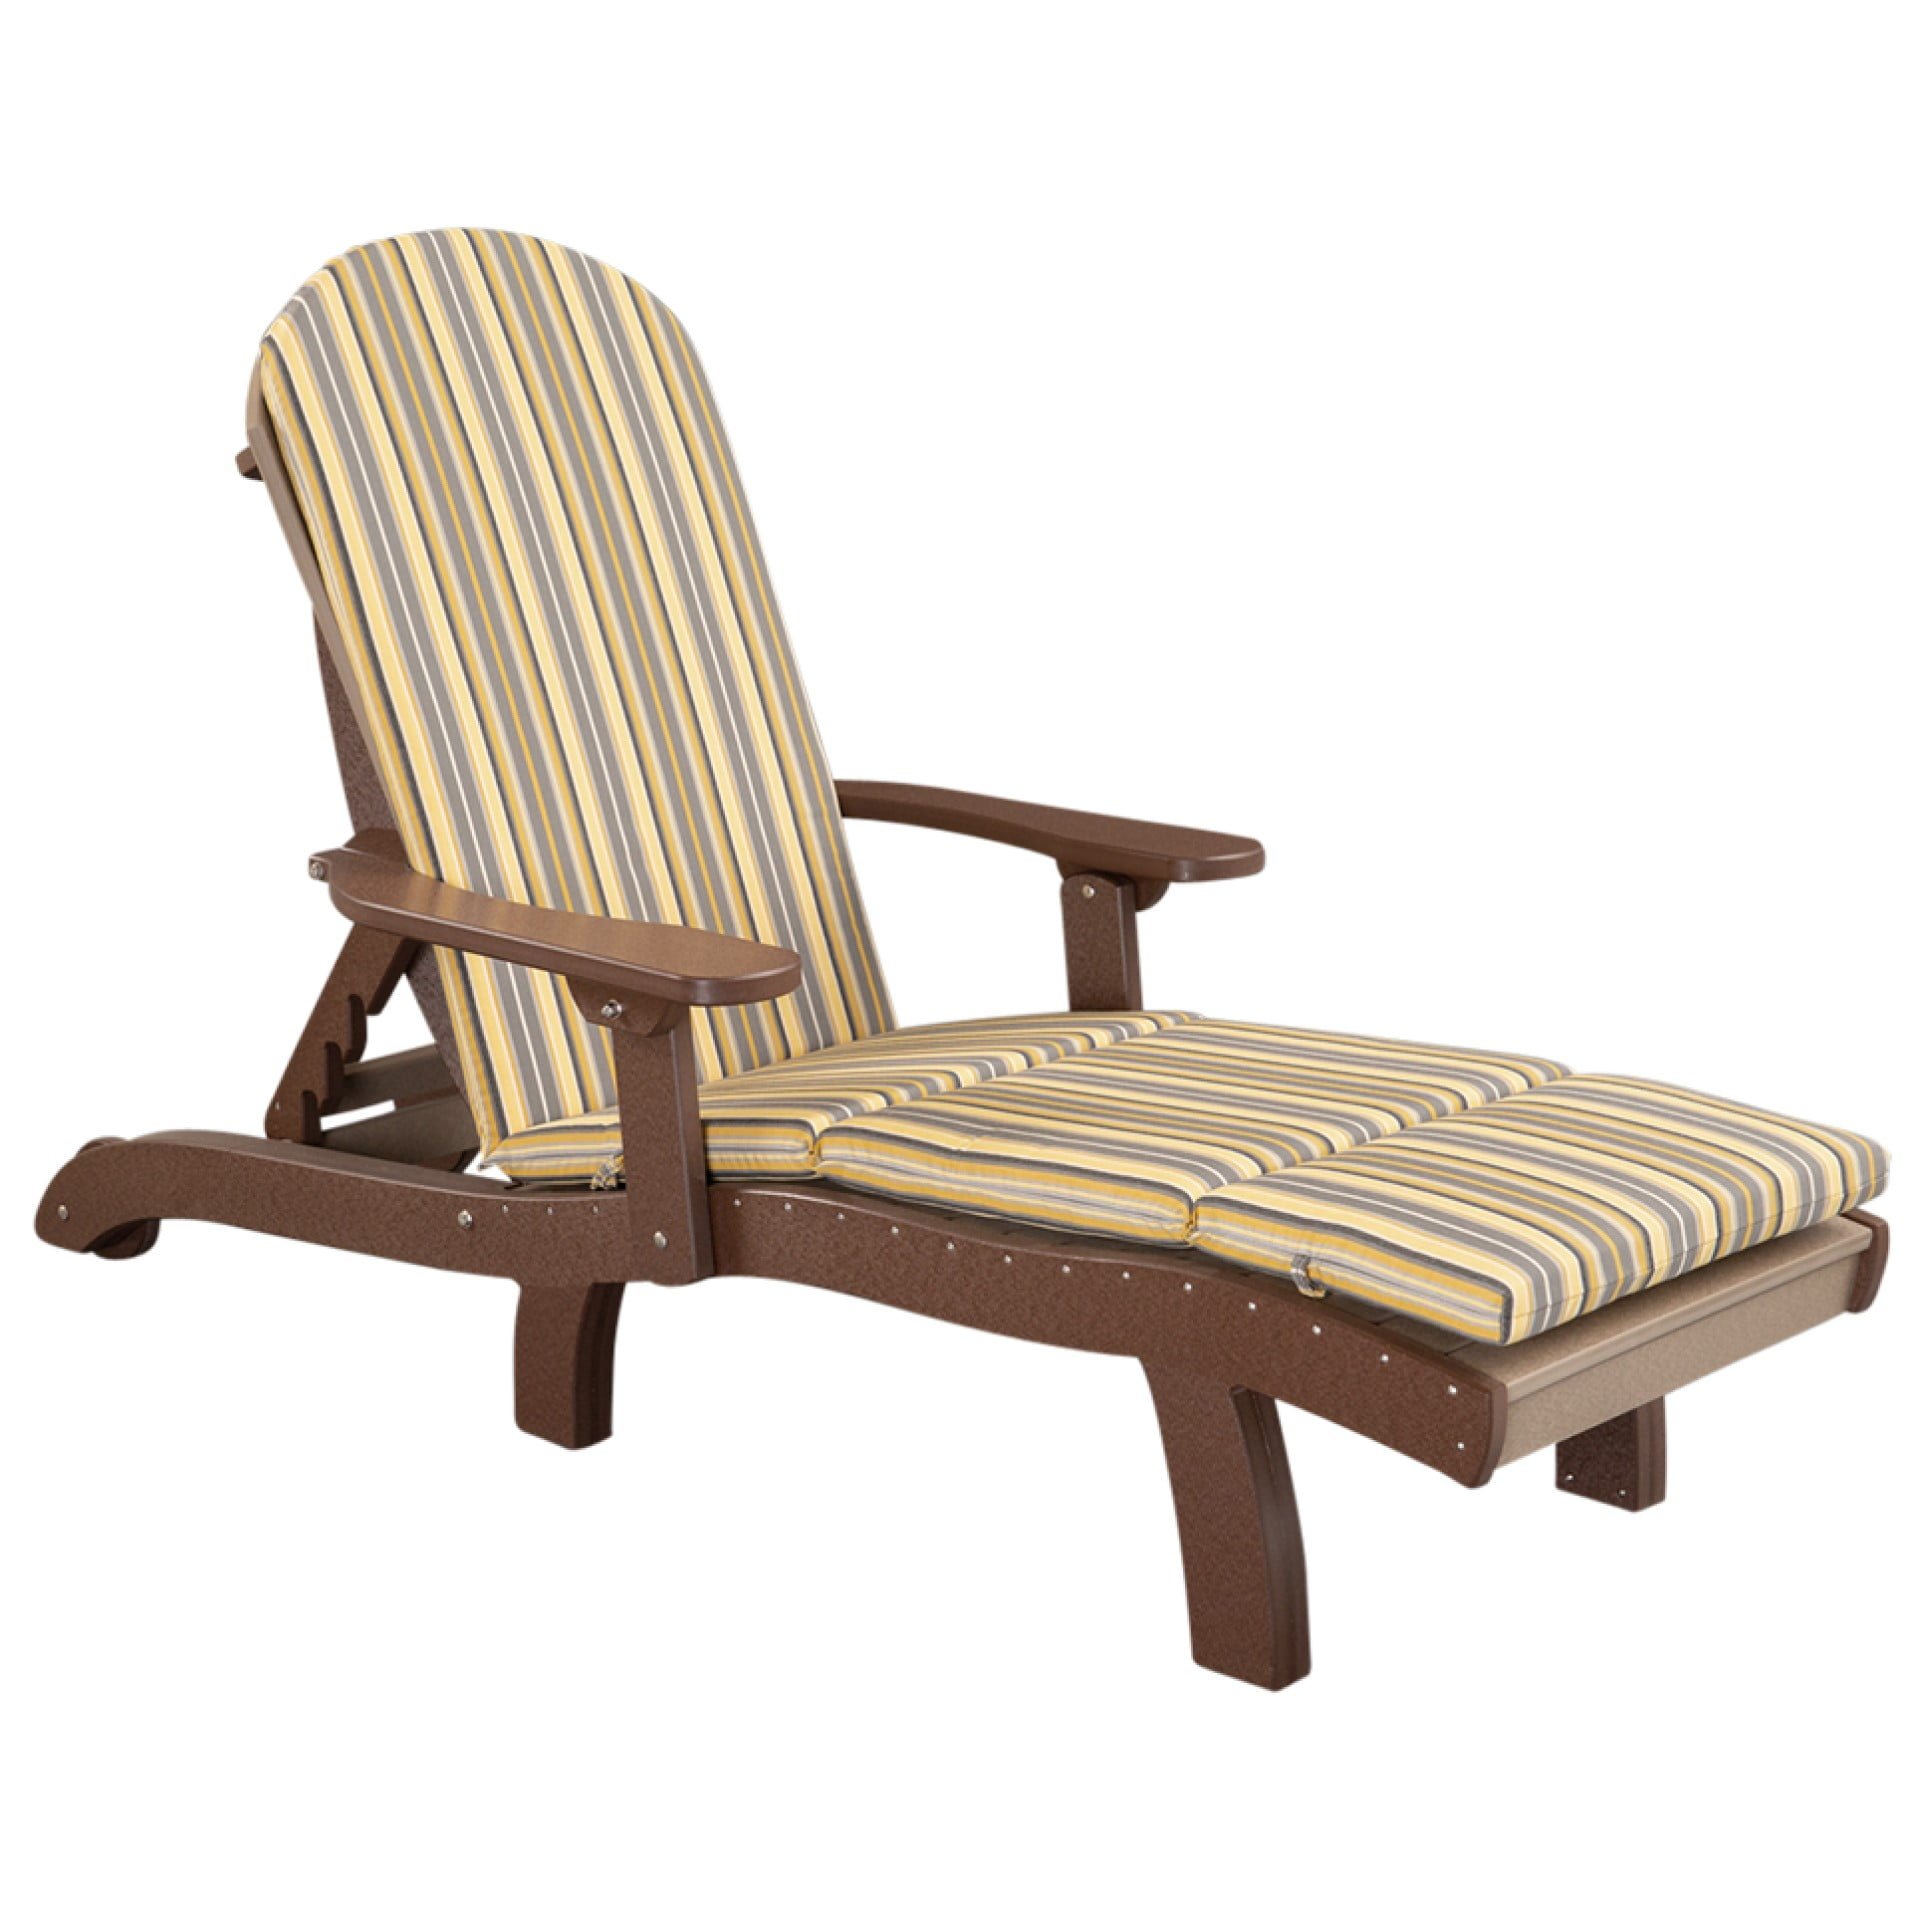 Finch SeaAira Chaise Lounge Seat and Back Cushion